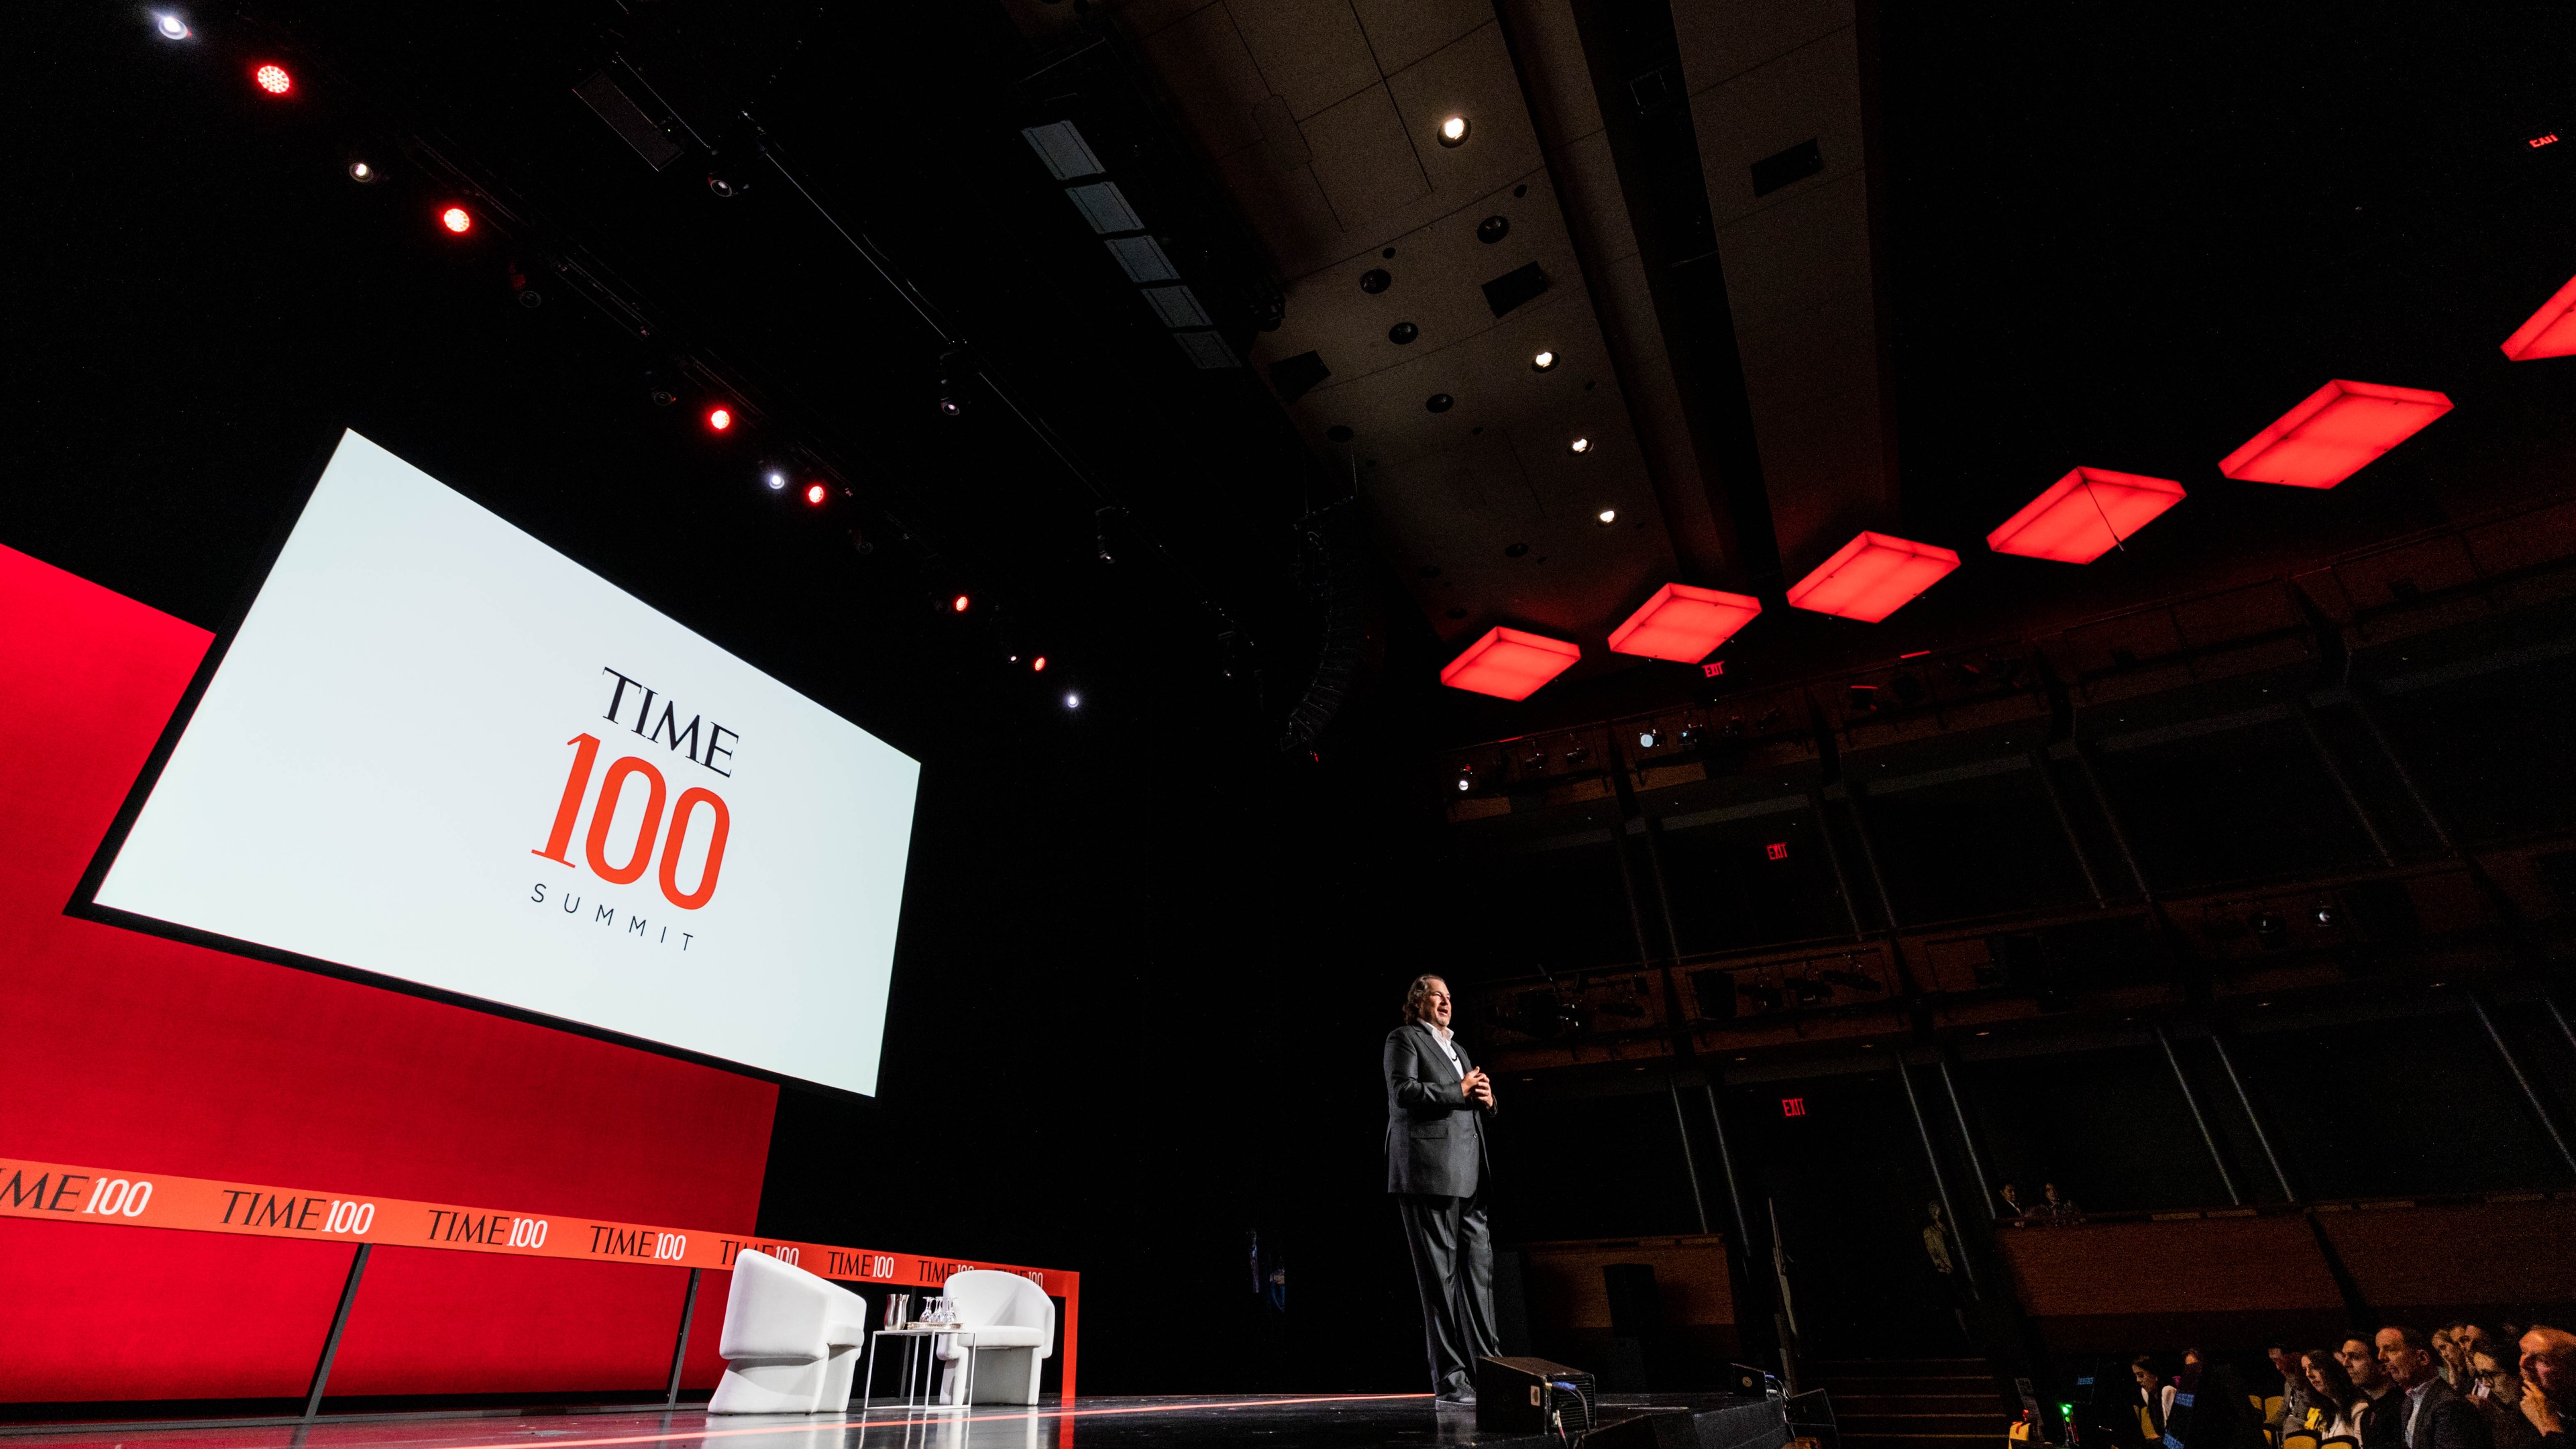 Person on stage with "TIME100 SUMMIT" displayed on a screen behind them